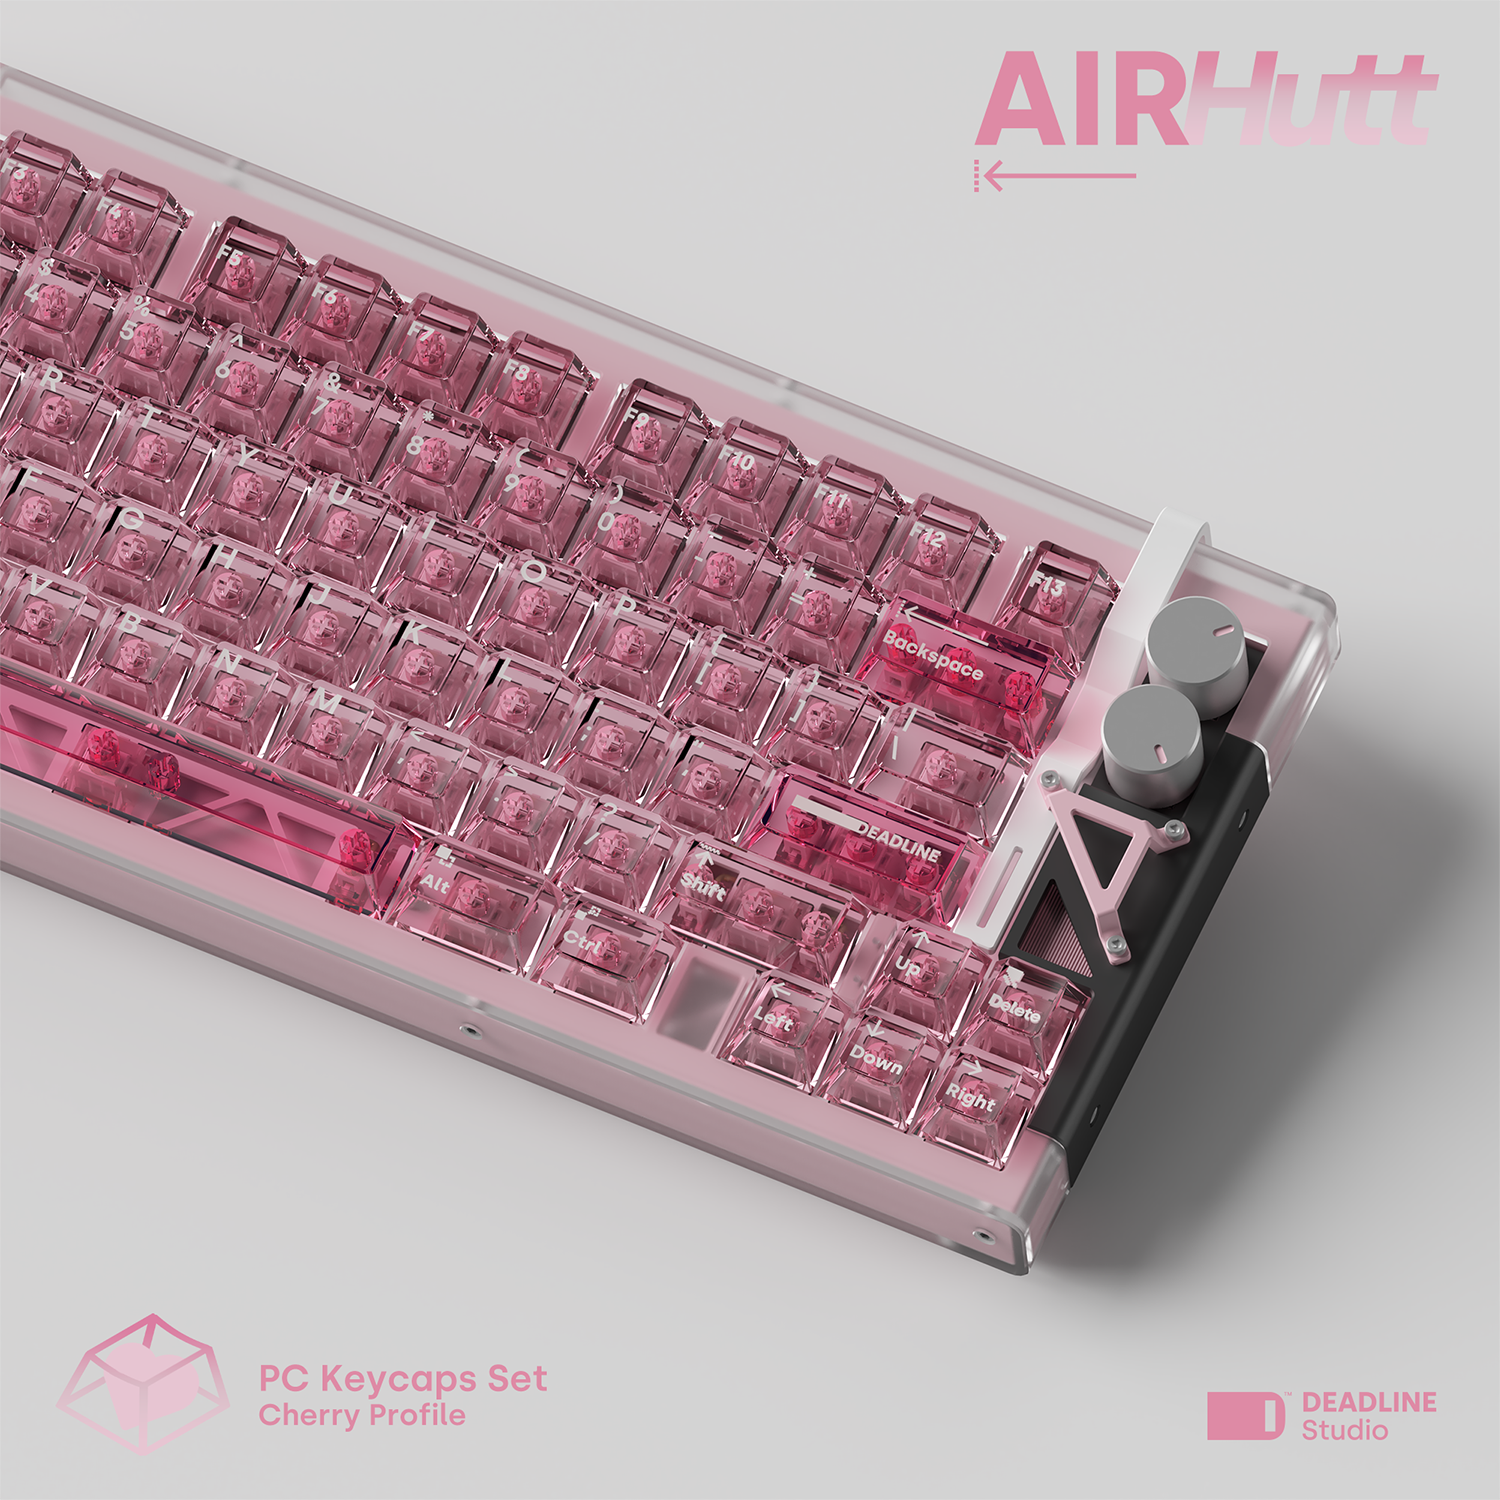 [Group Buy] Deadline Air-Hutt PC Keycaps - KeebsForAll